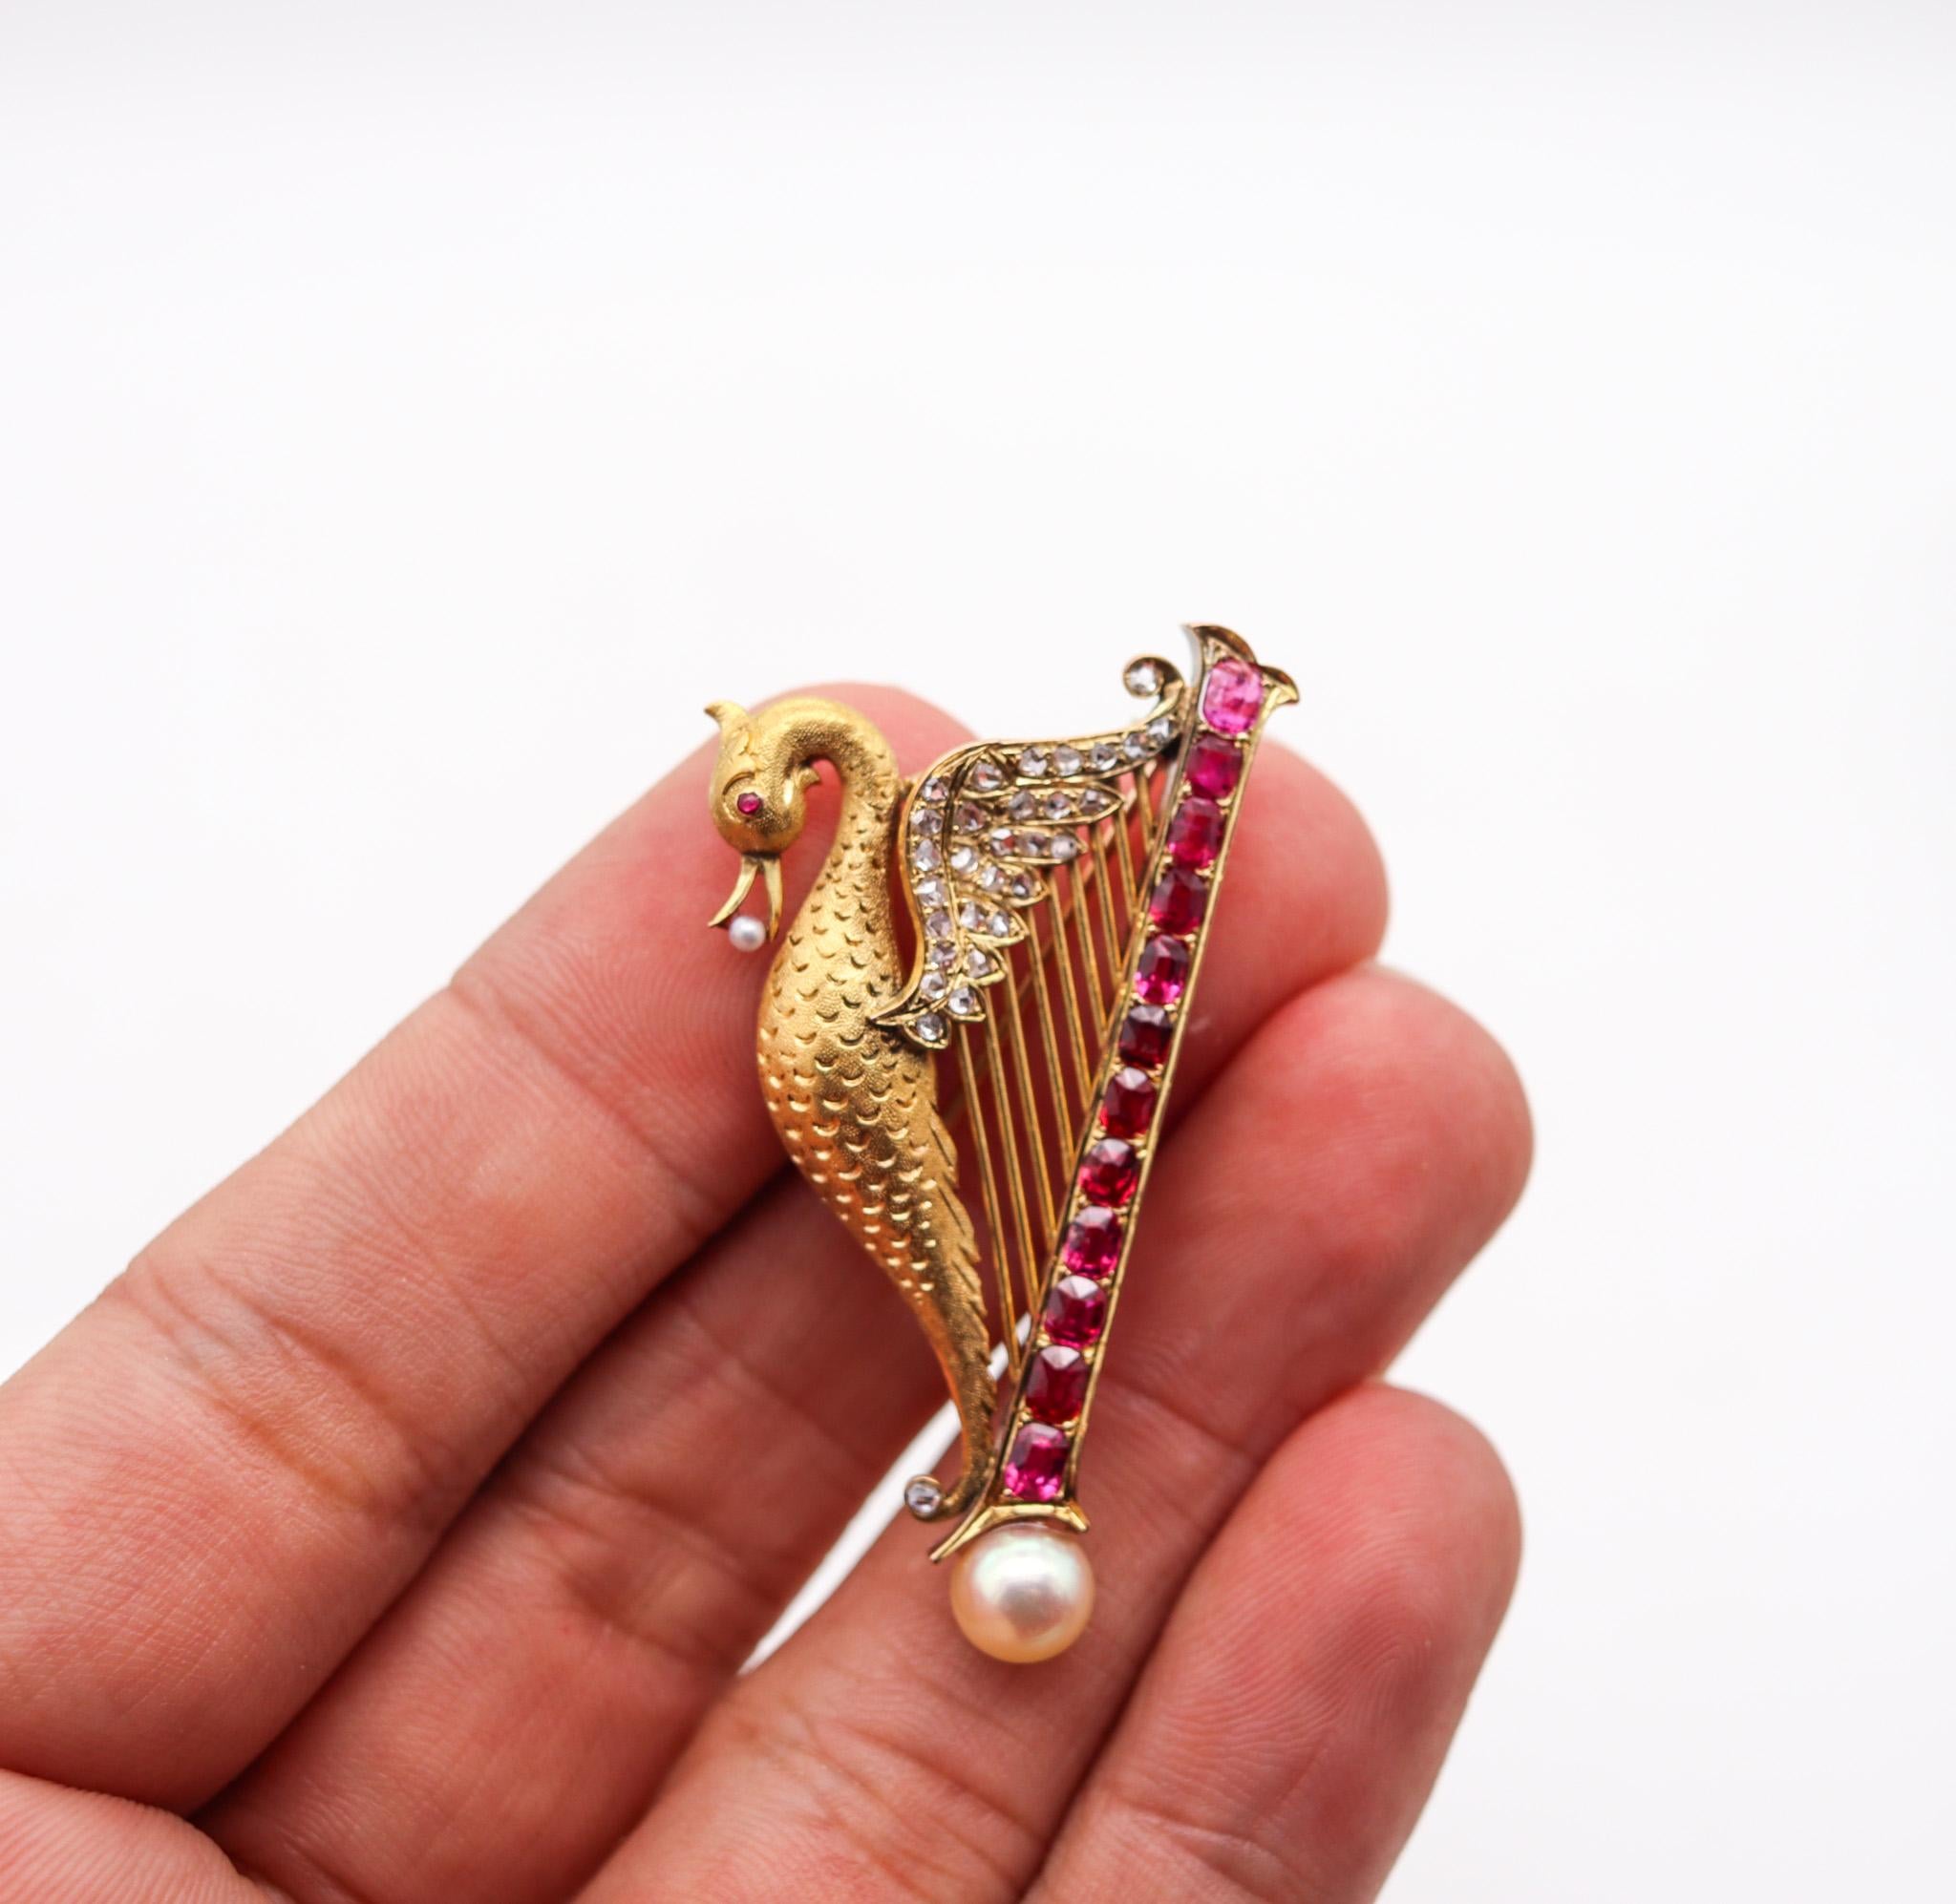 French 1890 Art Nouveau Swan Arp Brooch 18Kt Gold With 5.05 Ctw Rubies Diamonds For Sale 2